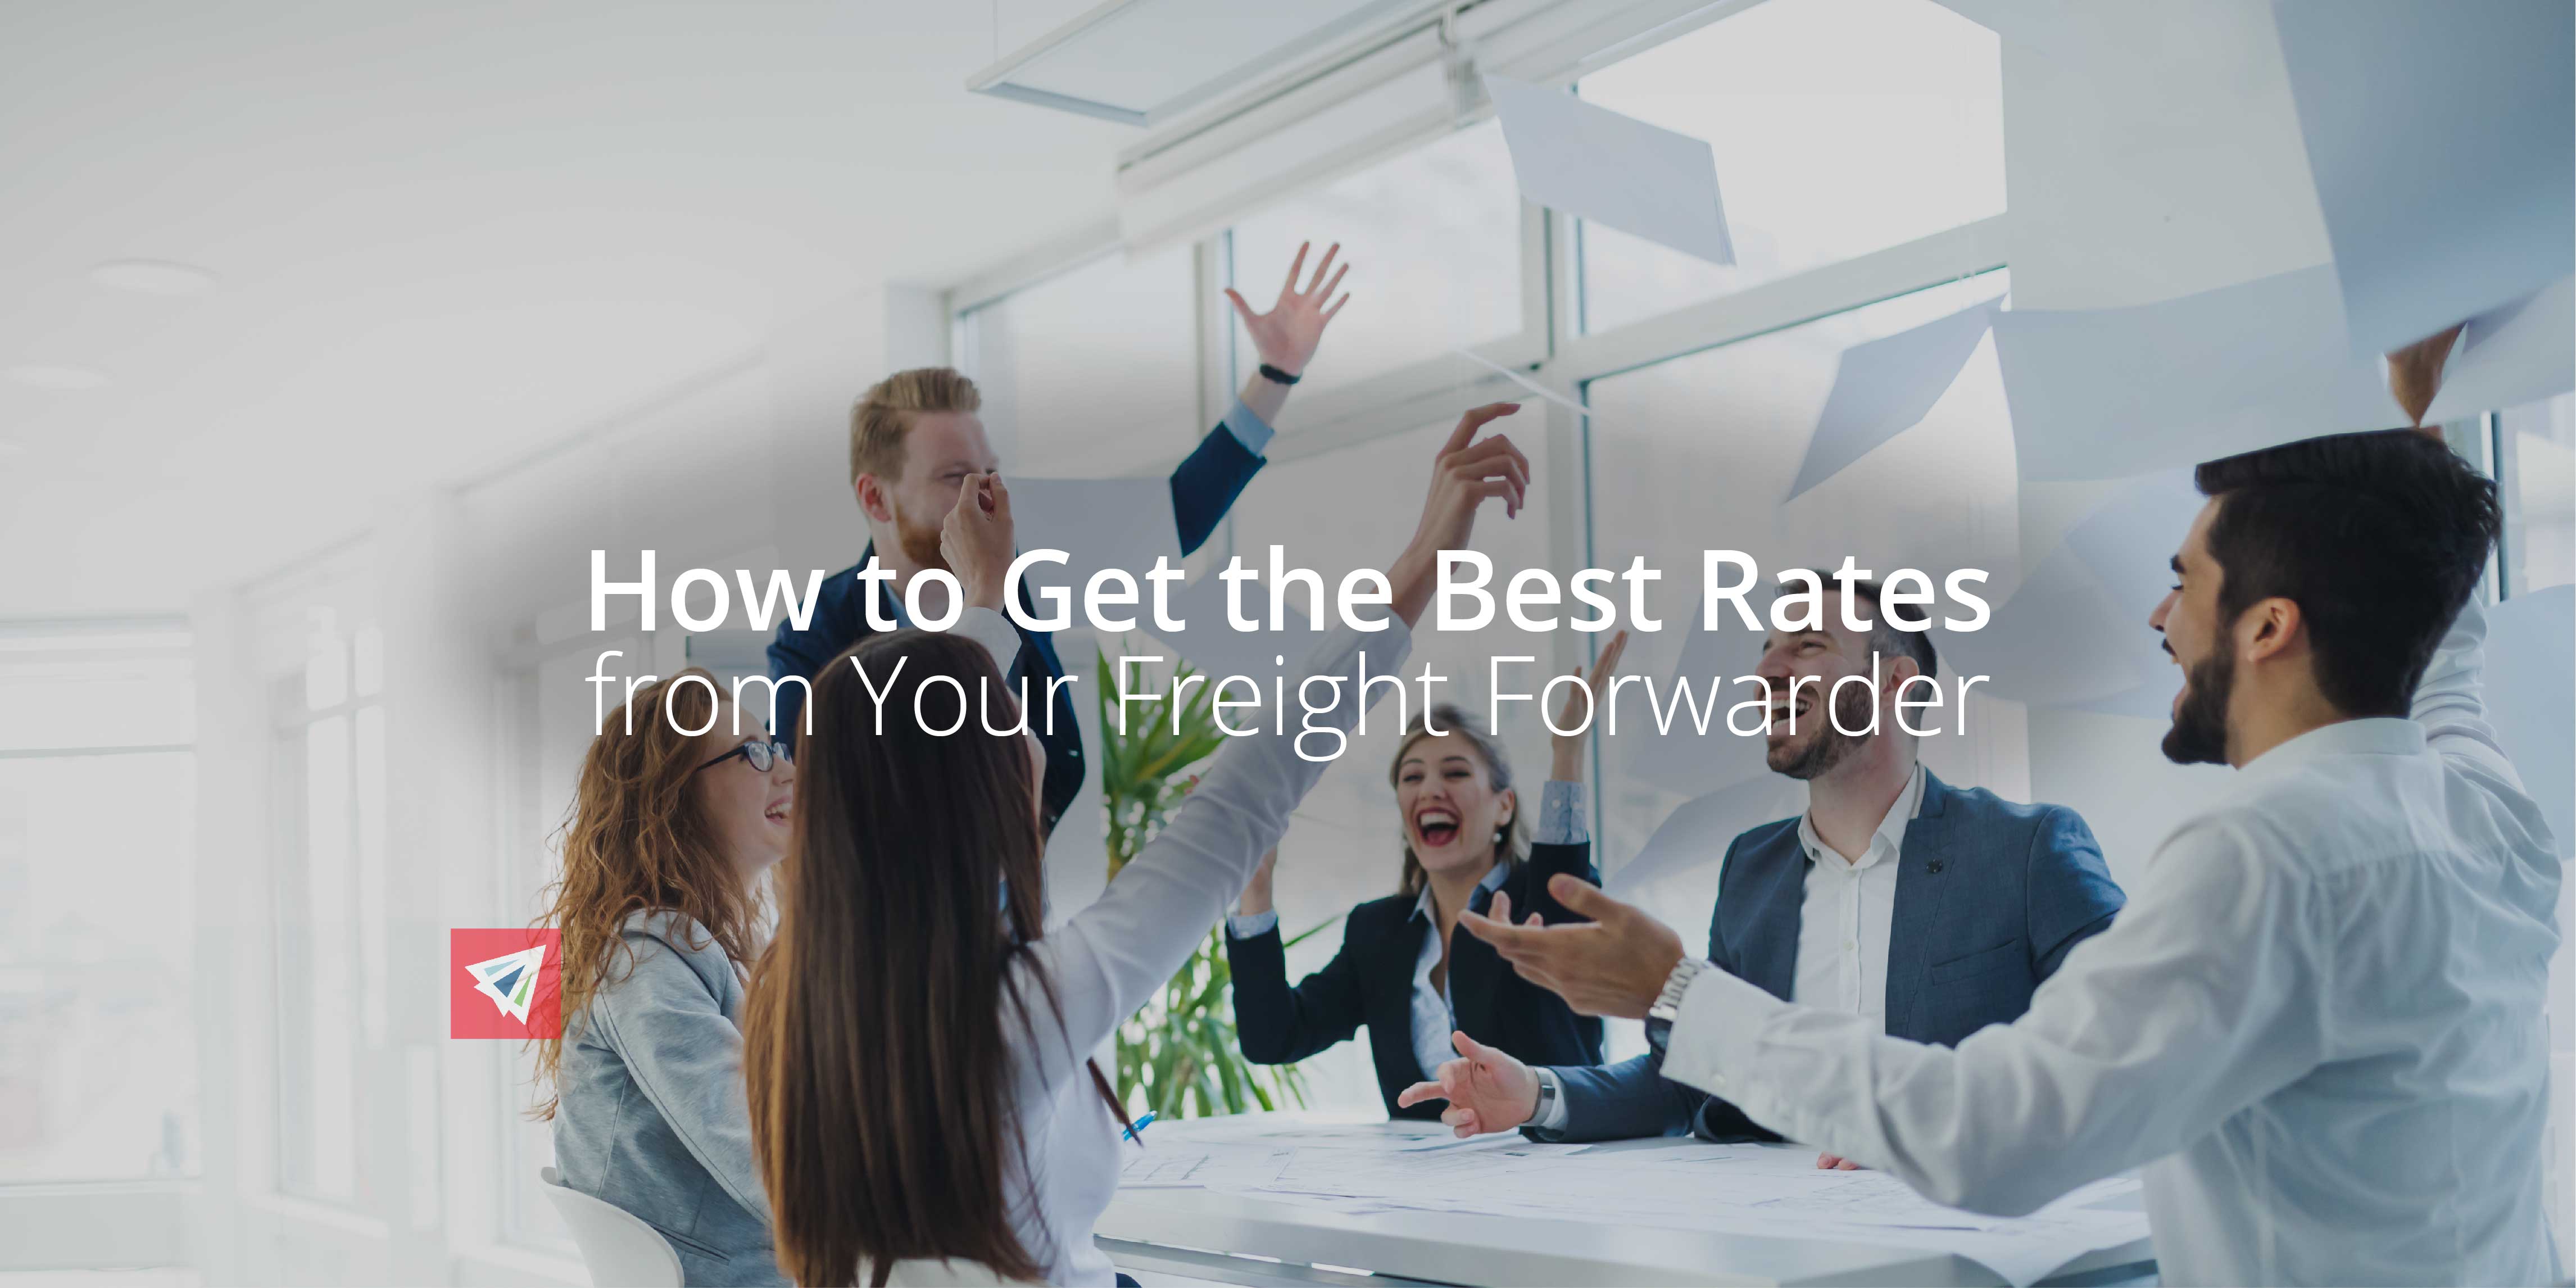 How to Get the Best Rates from Your Freight Forwarder